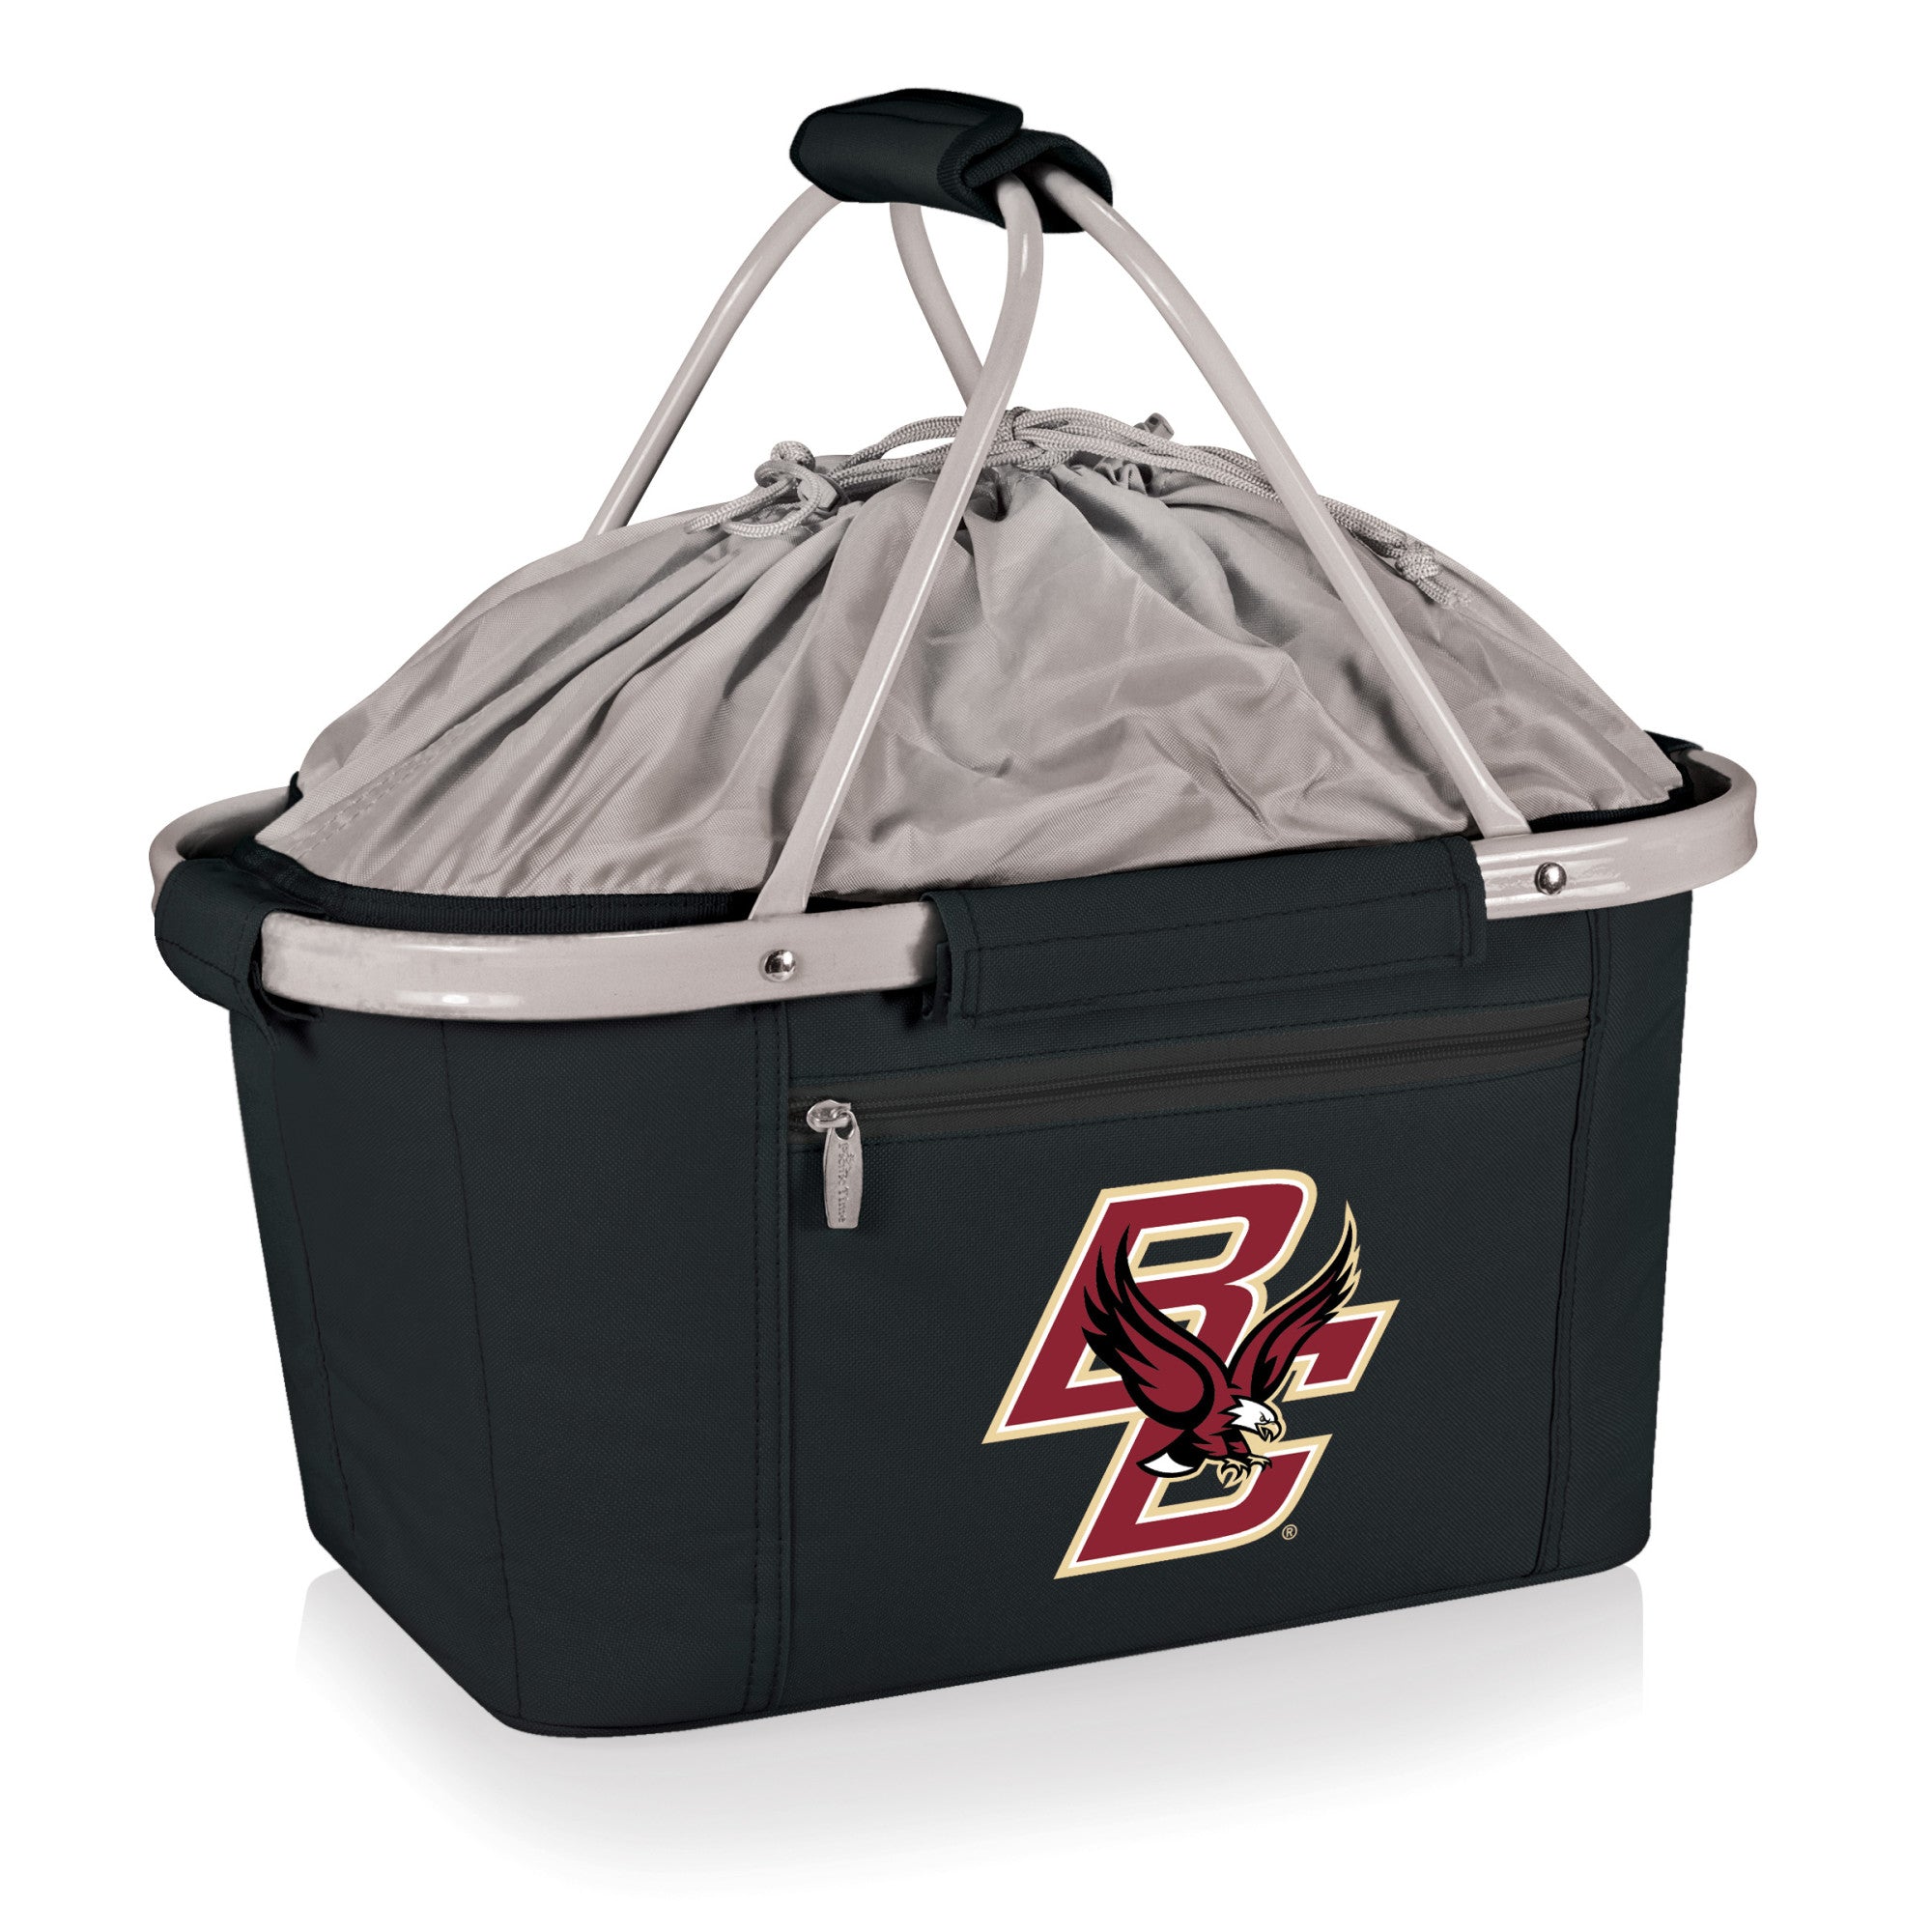 Boston College Eagles - Metro Basket Collapsible Cooler Tote